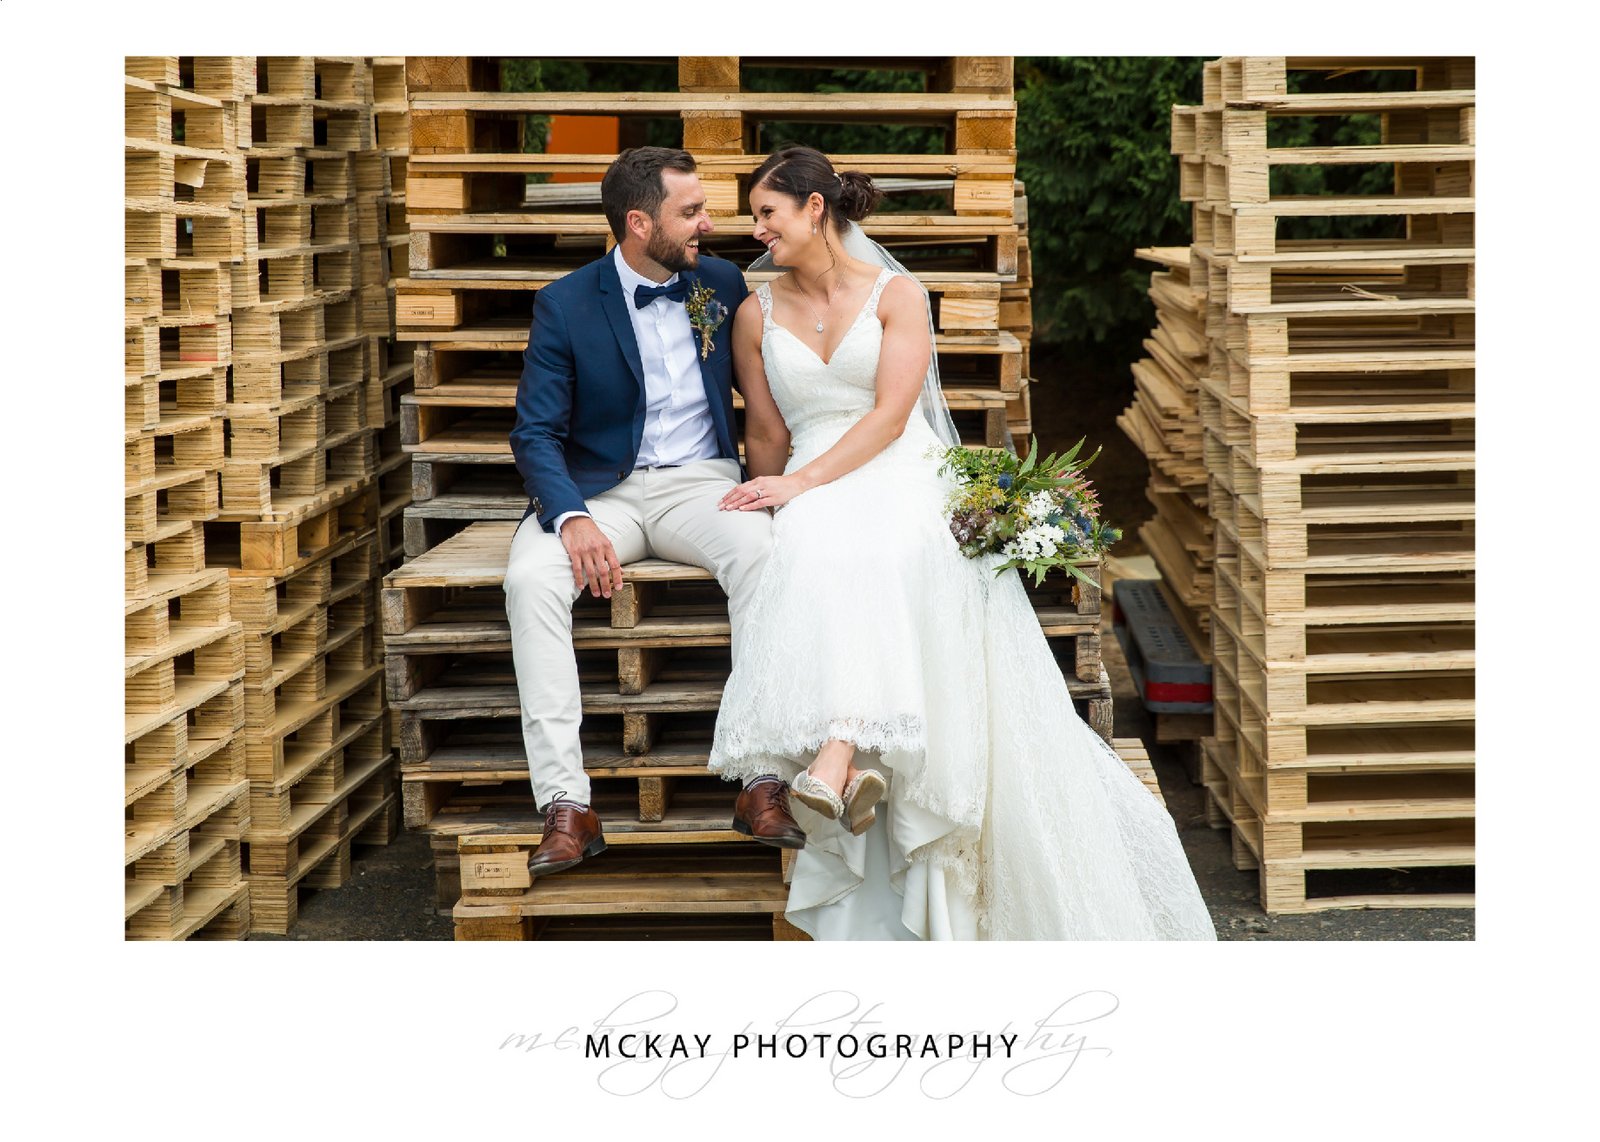 Amongst the pallets at Southern Highlands Winery wedding